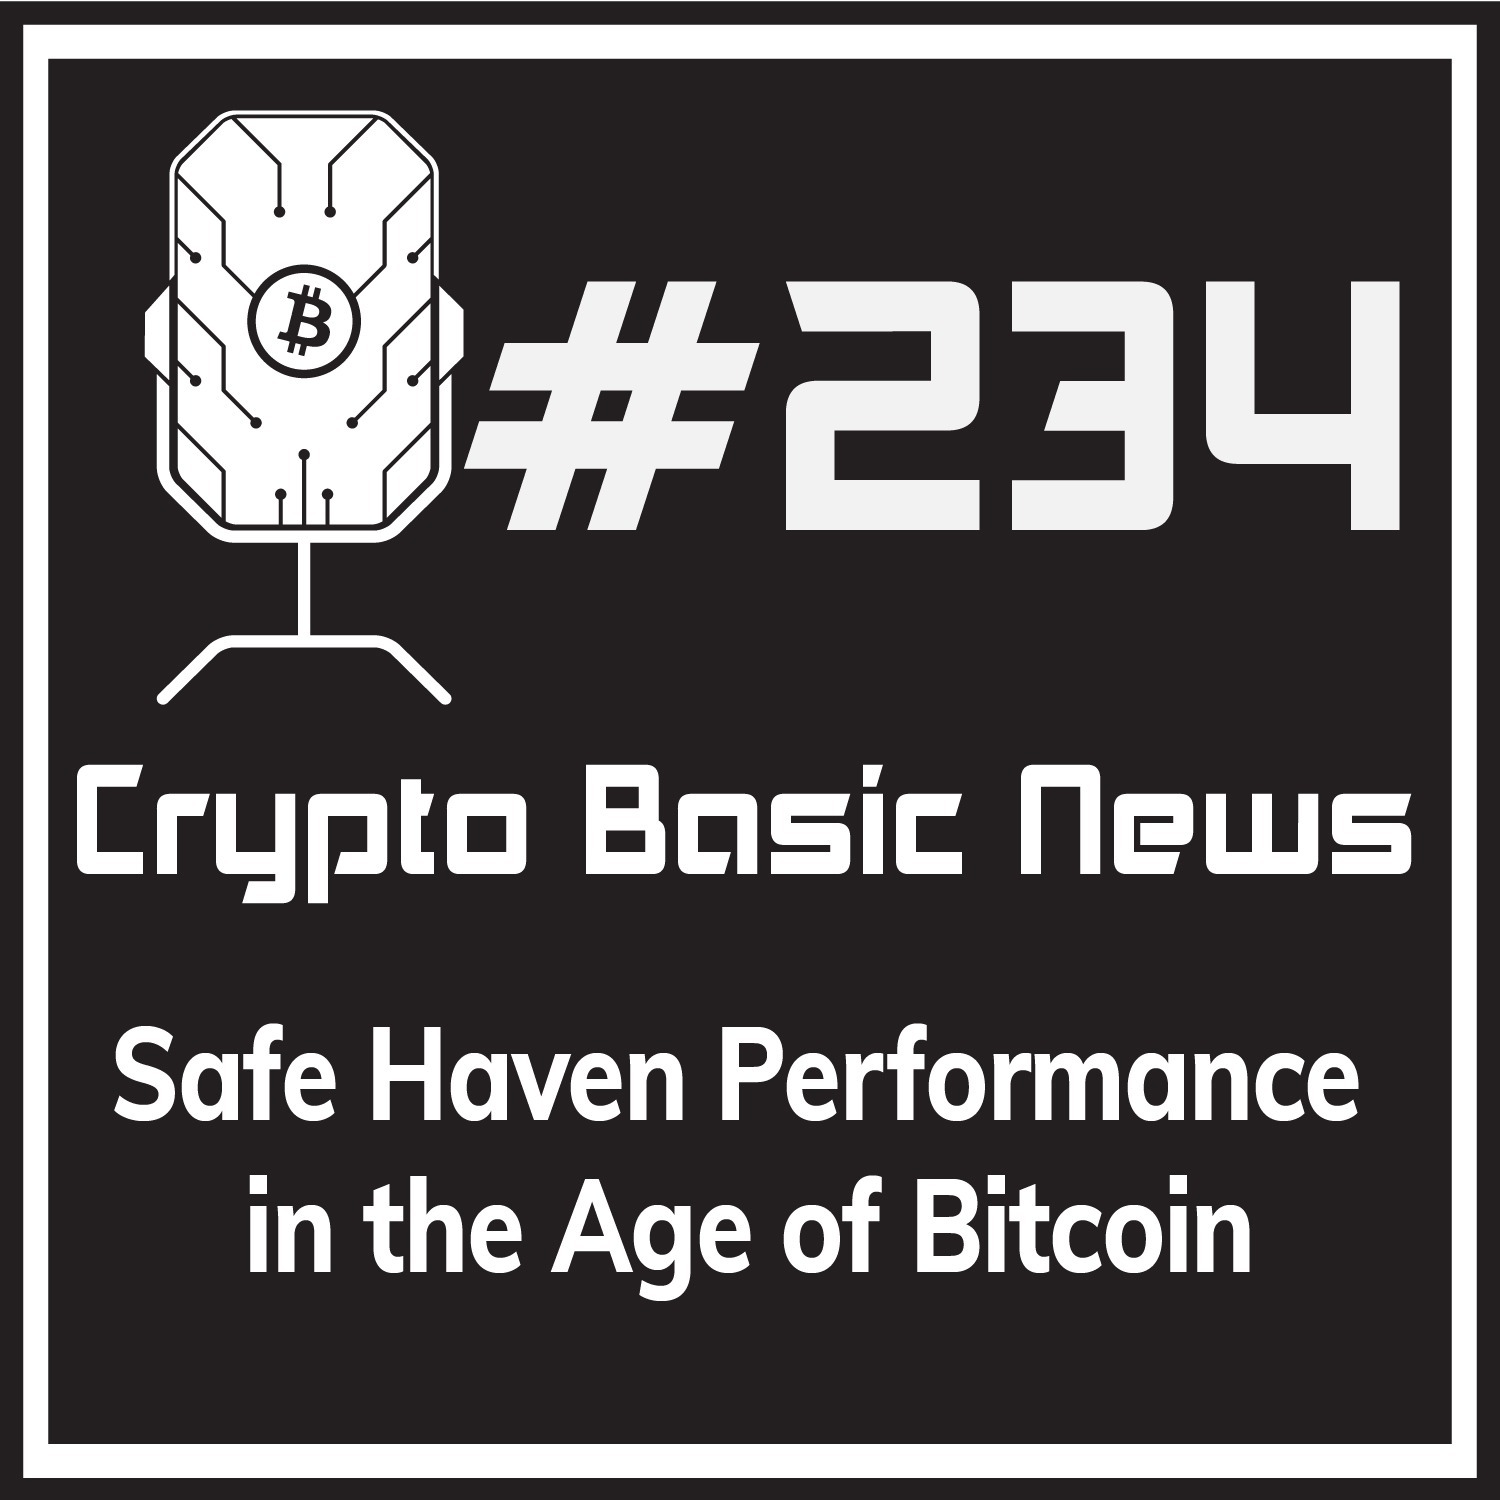 Episode 234 - Safe Haven Performance in the Age of Bitcoin